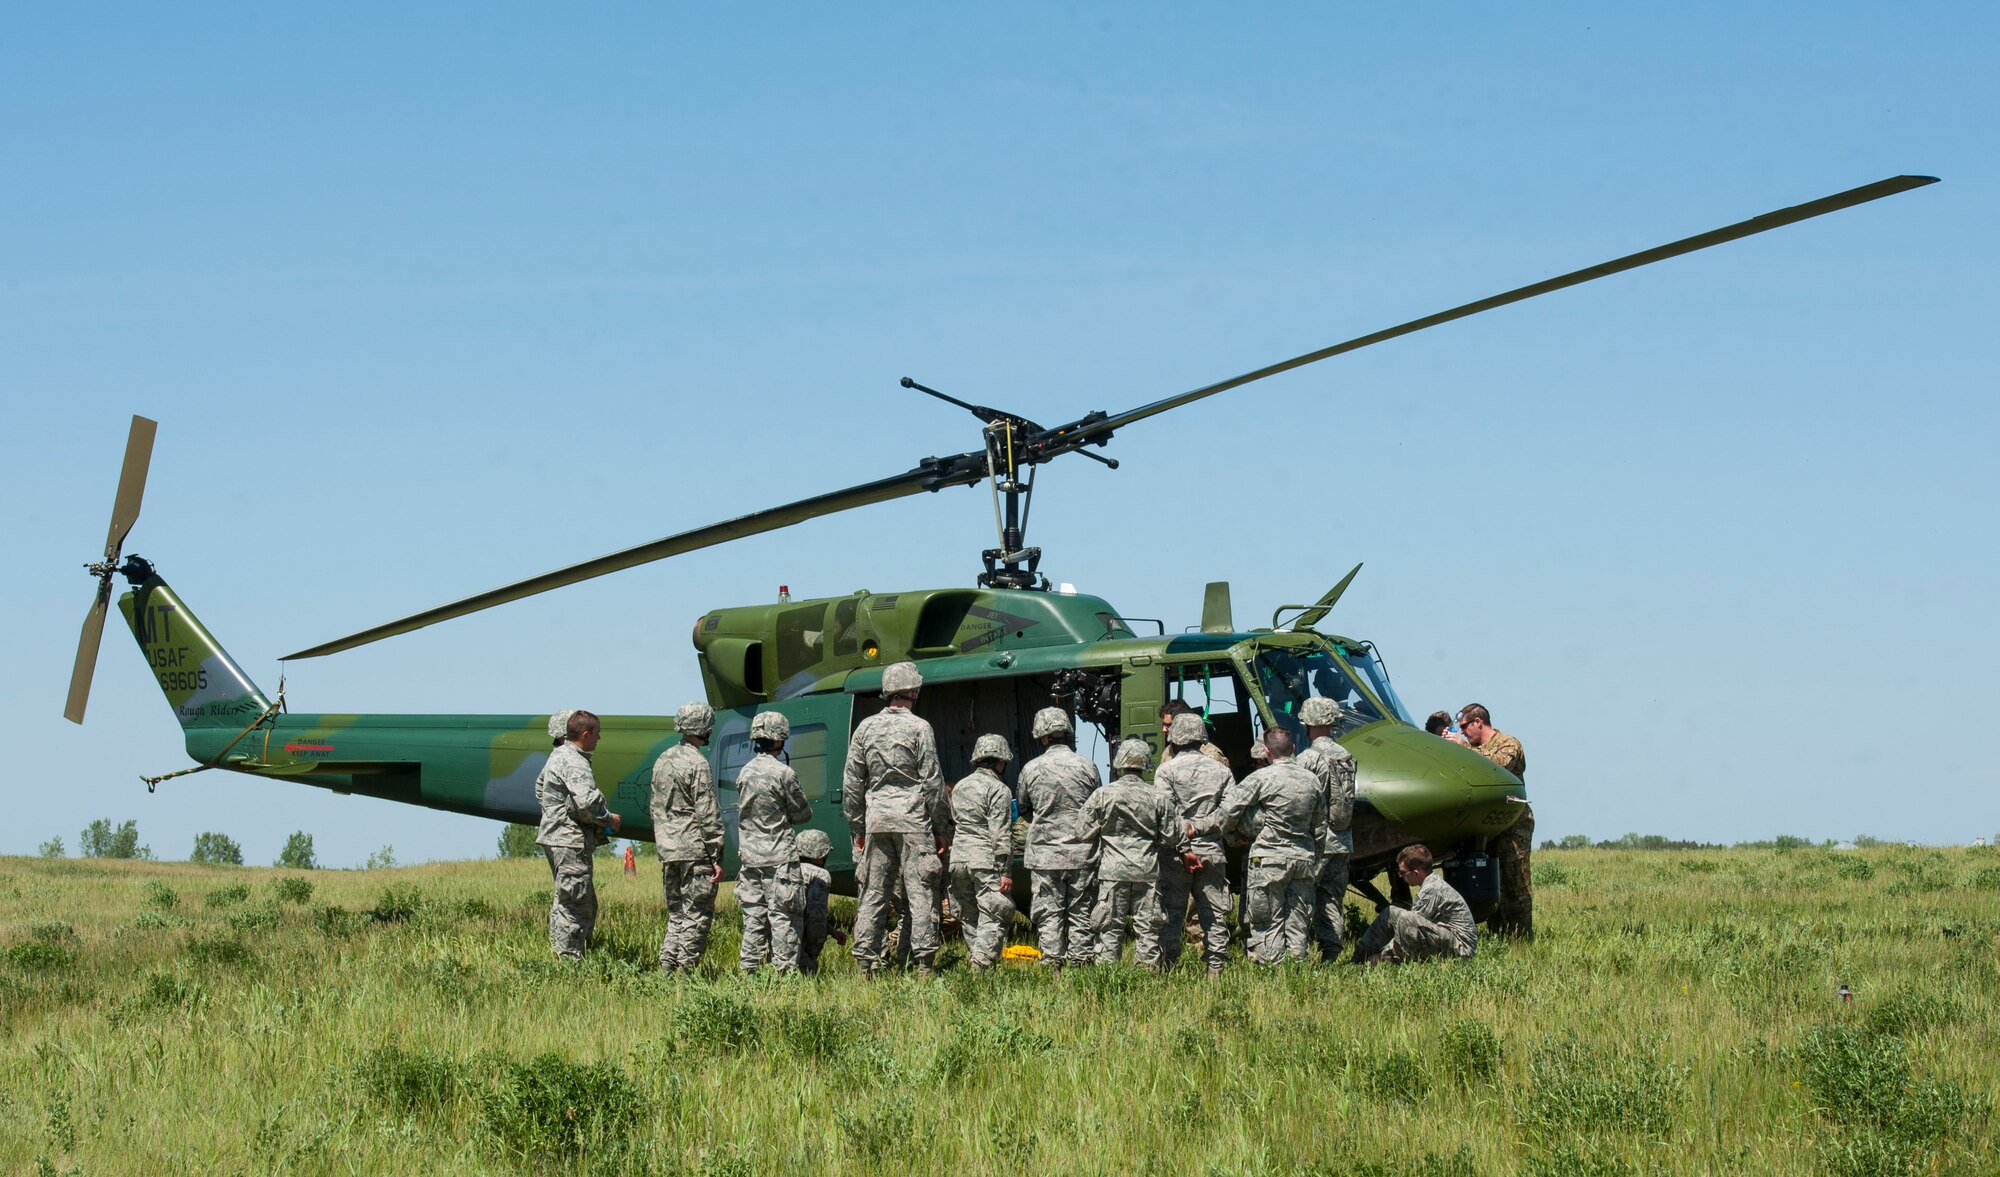 Members of the 5th Civil Engineer Squadron are briefed on hoist safety procedures at Minot Air Force Base, N.D., June 1, 2017. More than 60 CES Airmen participated in the training, which consisted of an array of deployment-type tasks. (U.S. Air Force photo/Airman 1st Class Jonathan McElderry)